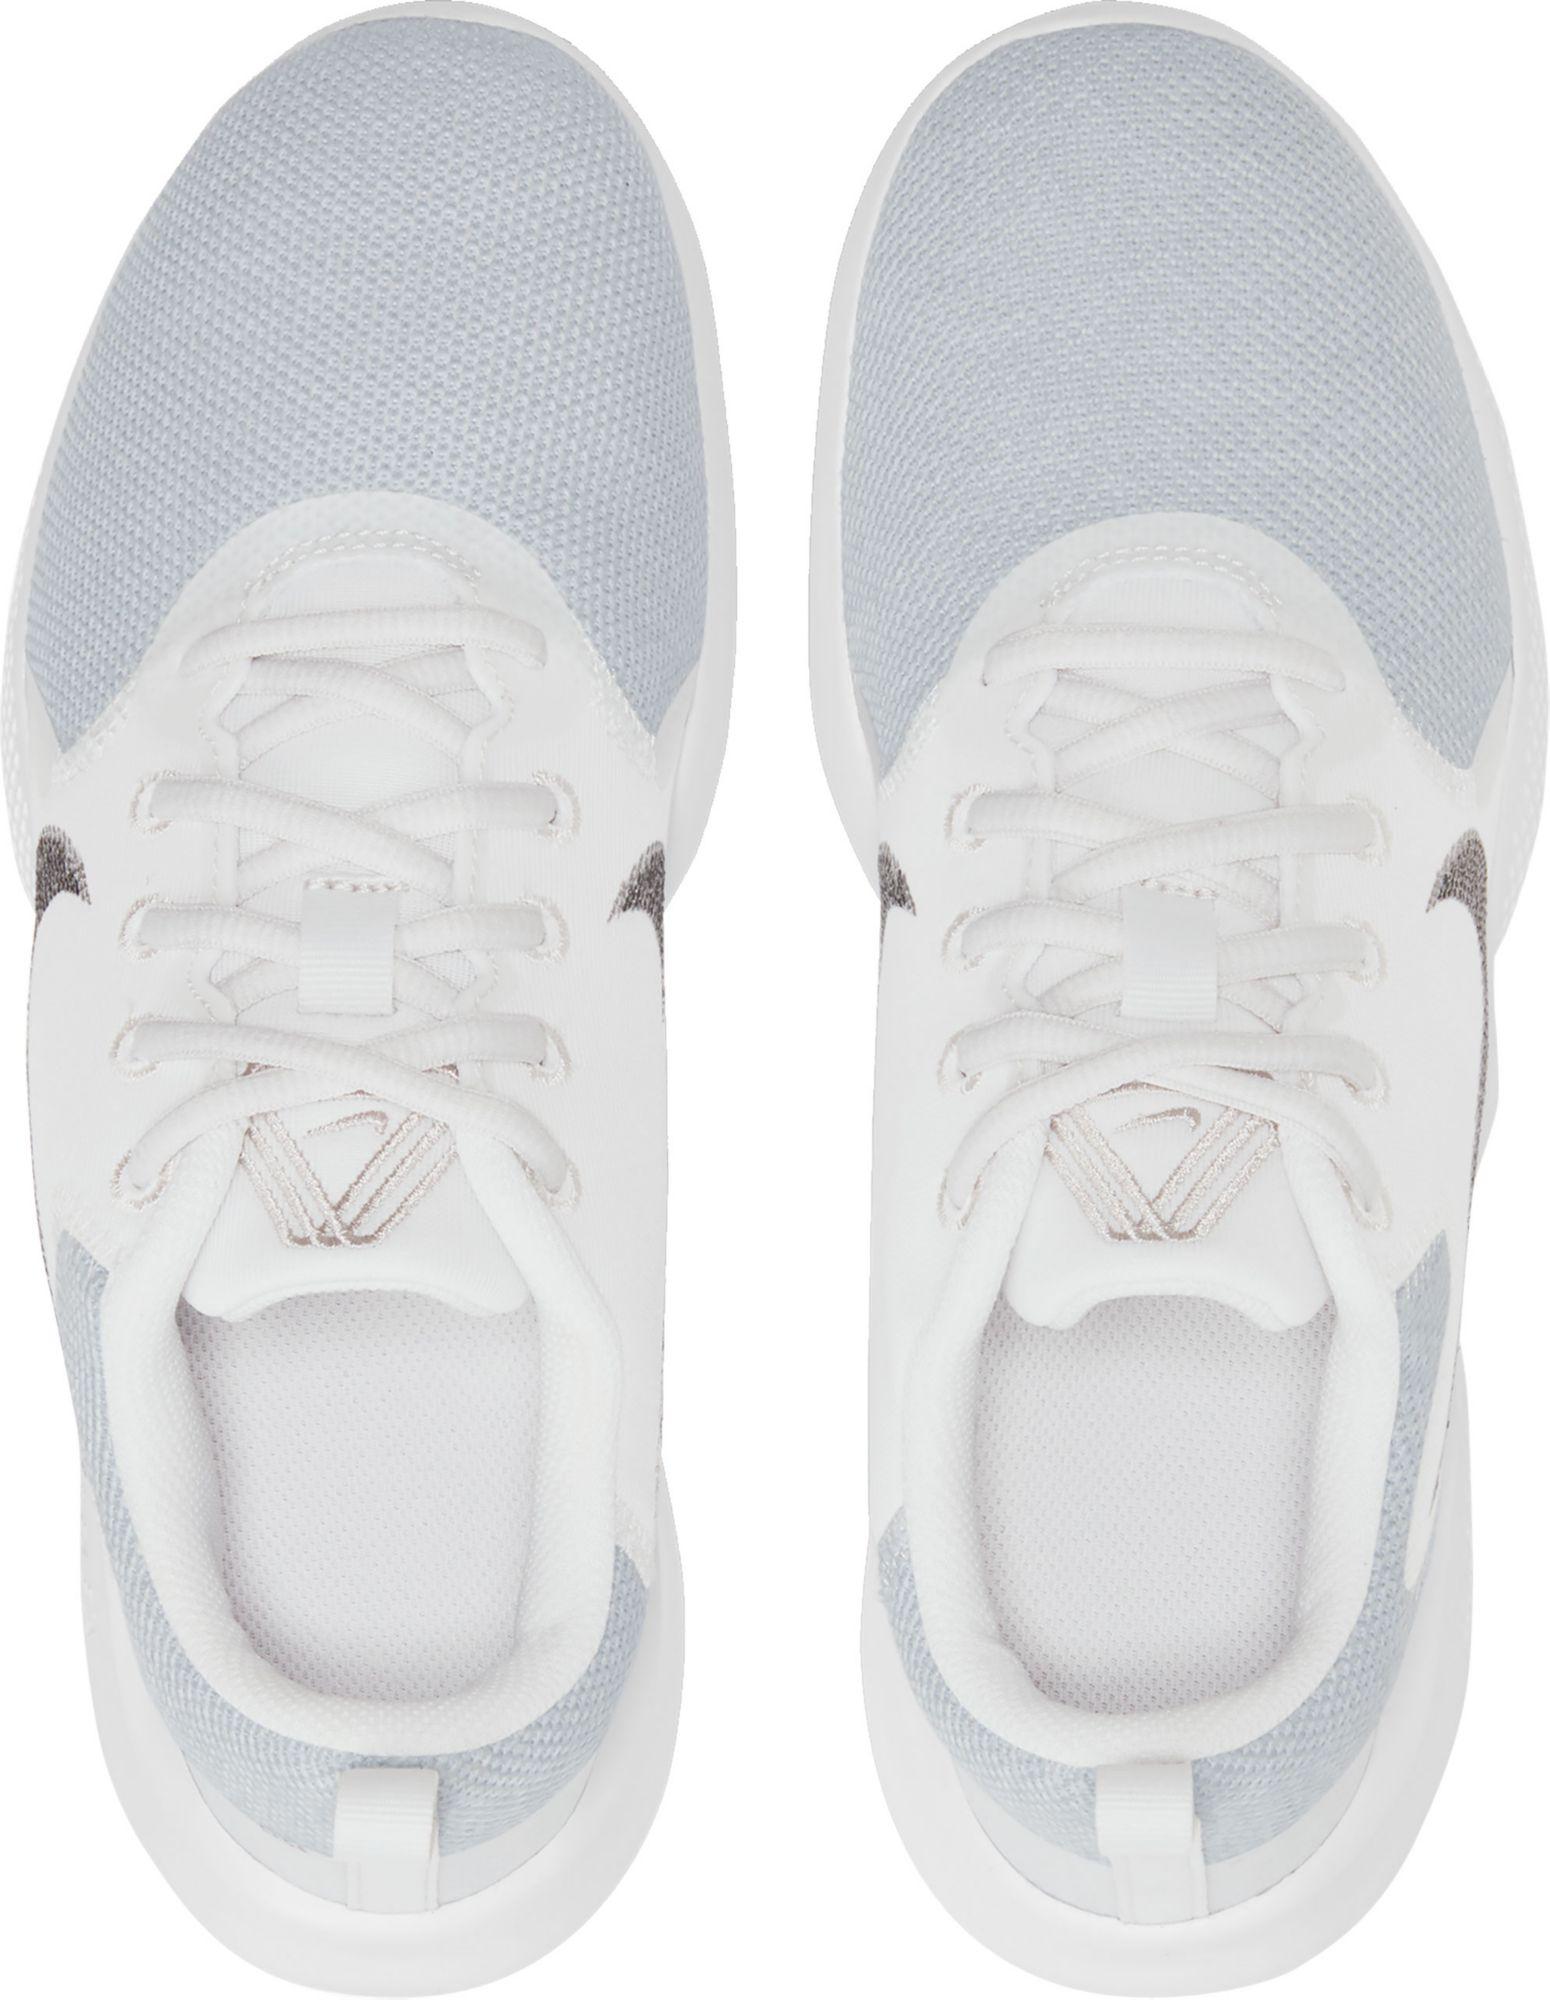 Nike Flex Experience Run 10 Running Shoes in White/Silver (White) - Lyst